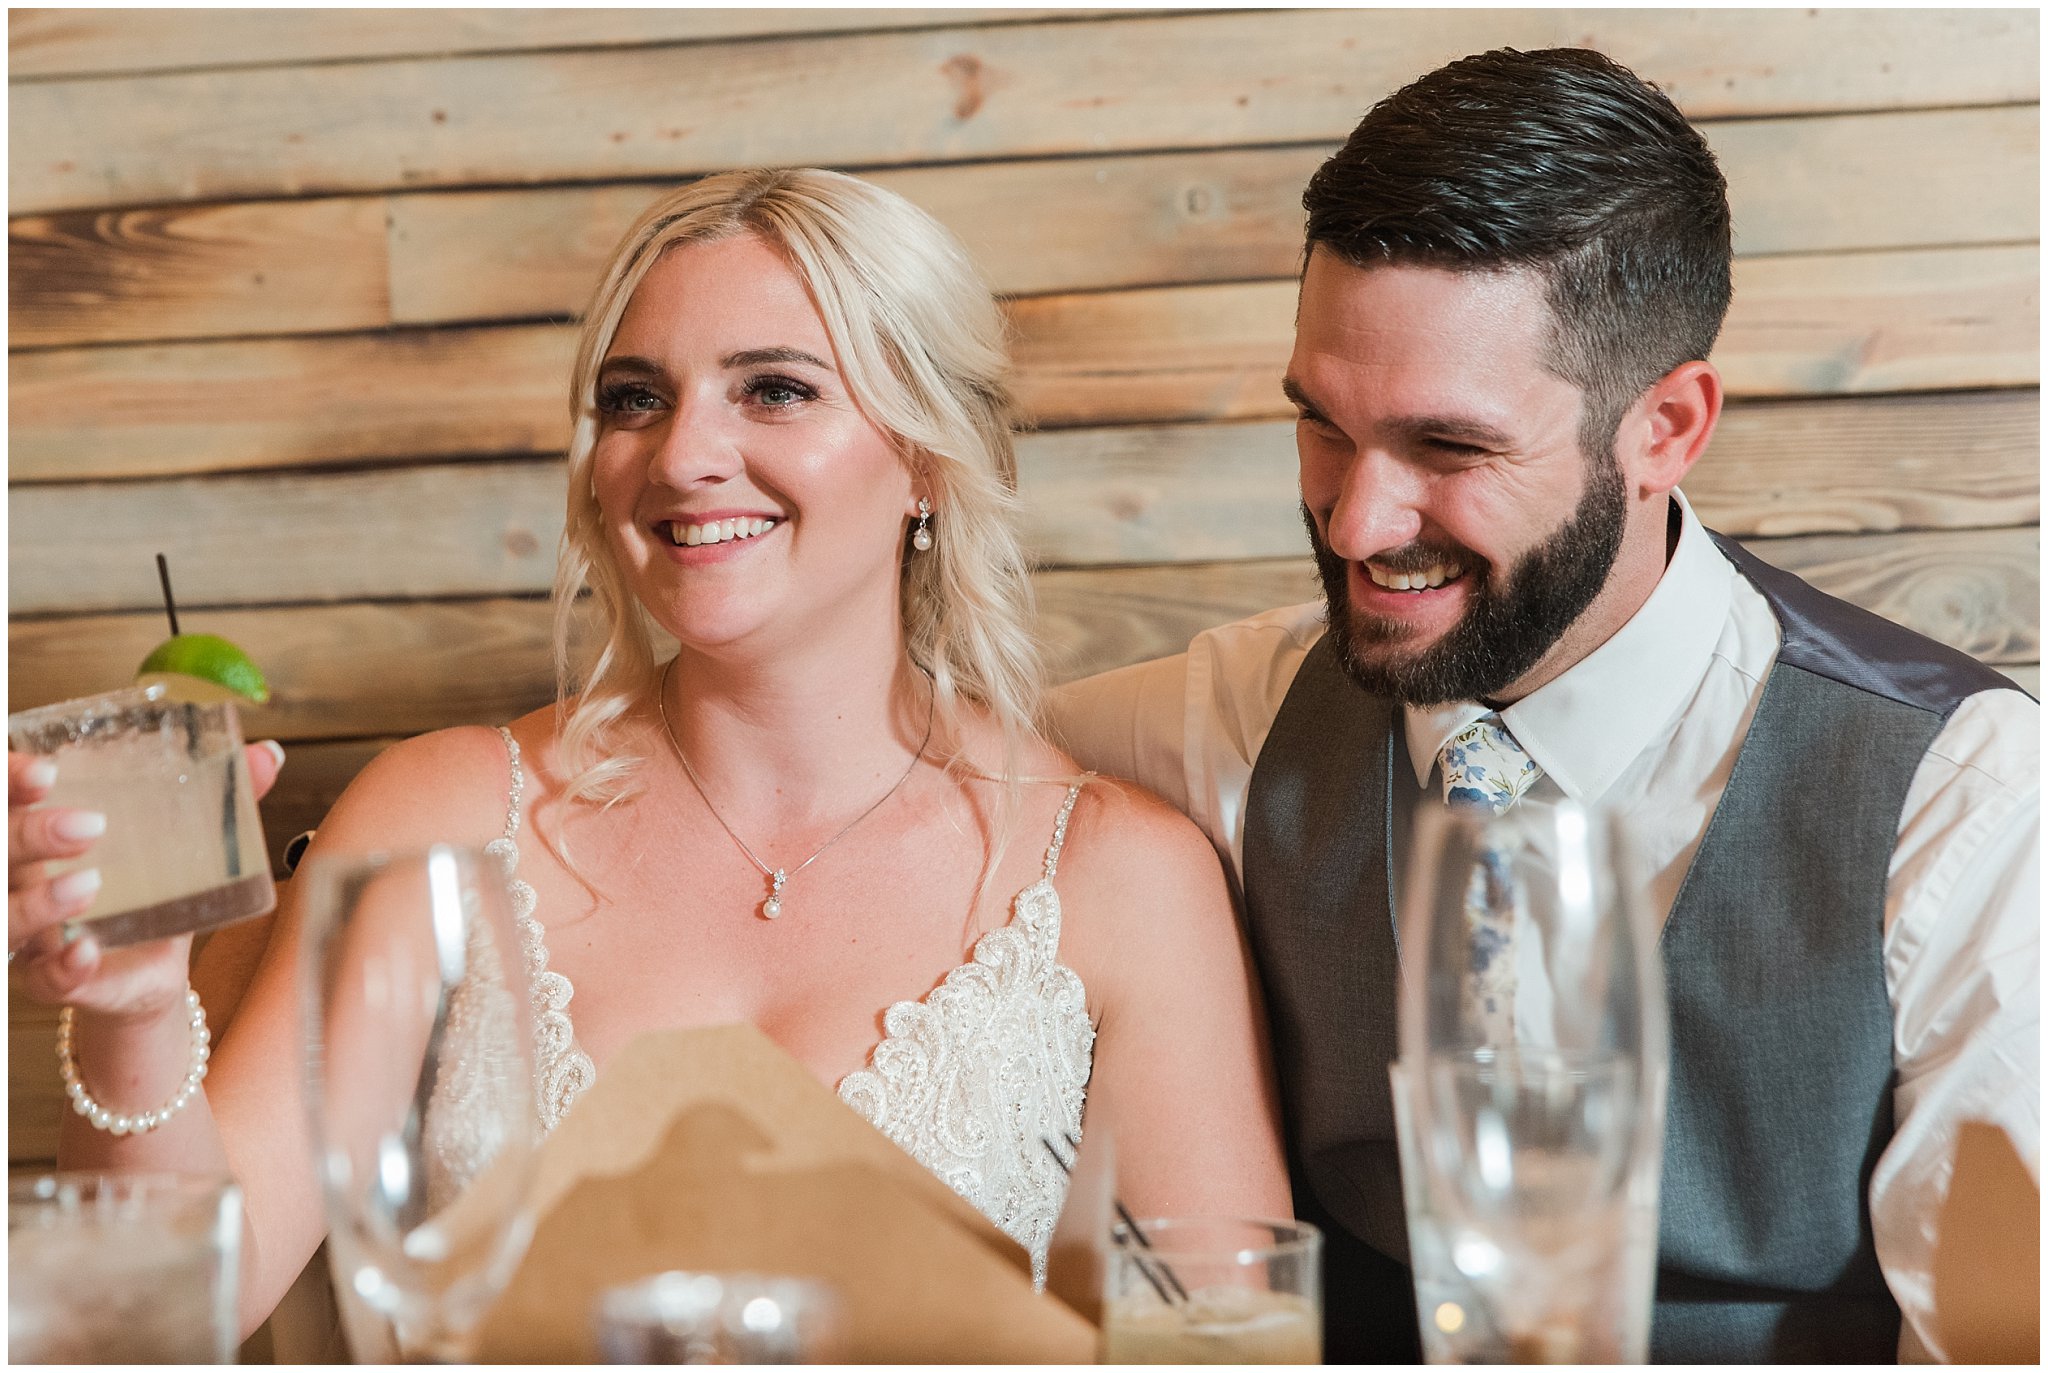 Toasts and speeches during dinner | Dusty Blue and Rose Summer Wedding at Oak Hills Utah | Jessie and Dallin Photography